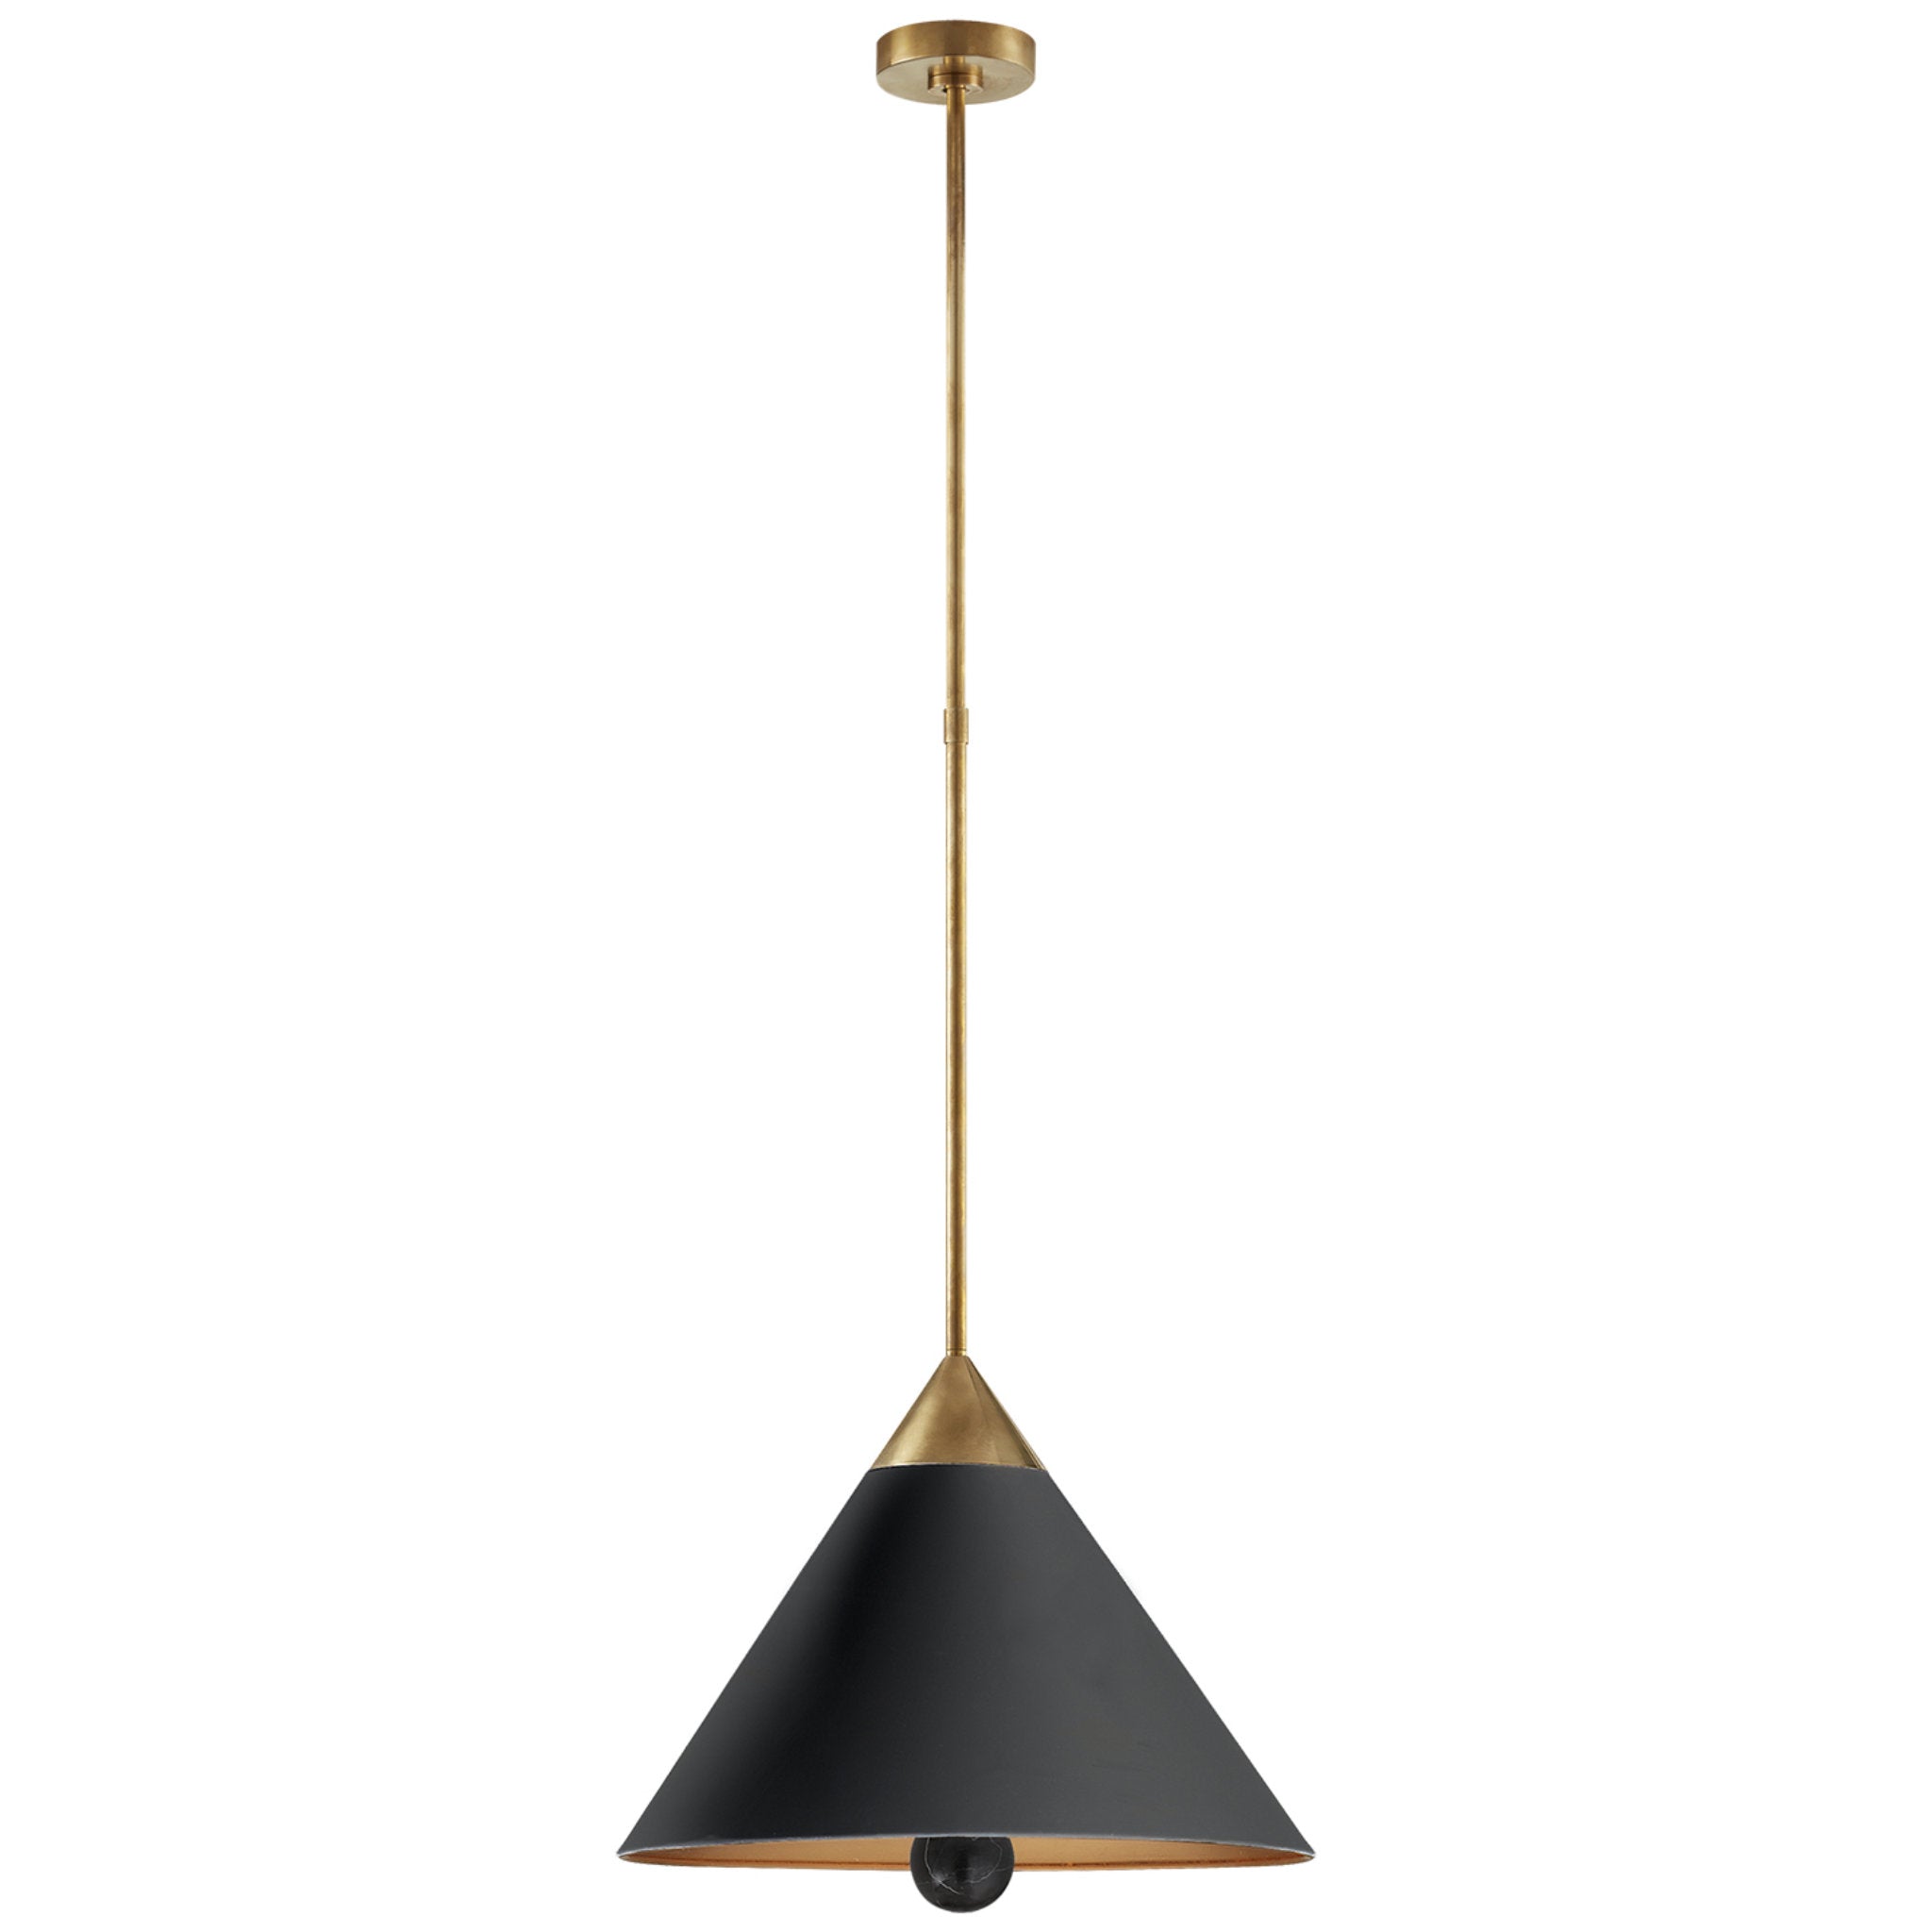 Kelly Wearstler Cleo Pendant in Antique-Burnished Brass and Black with Frosted Acrylic